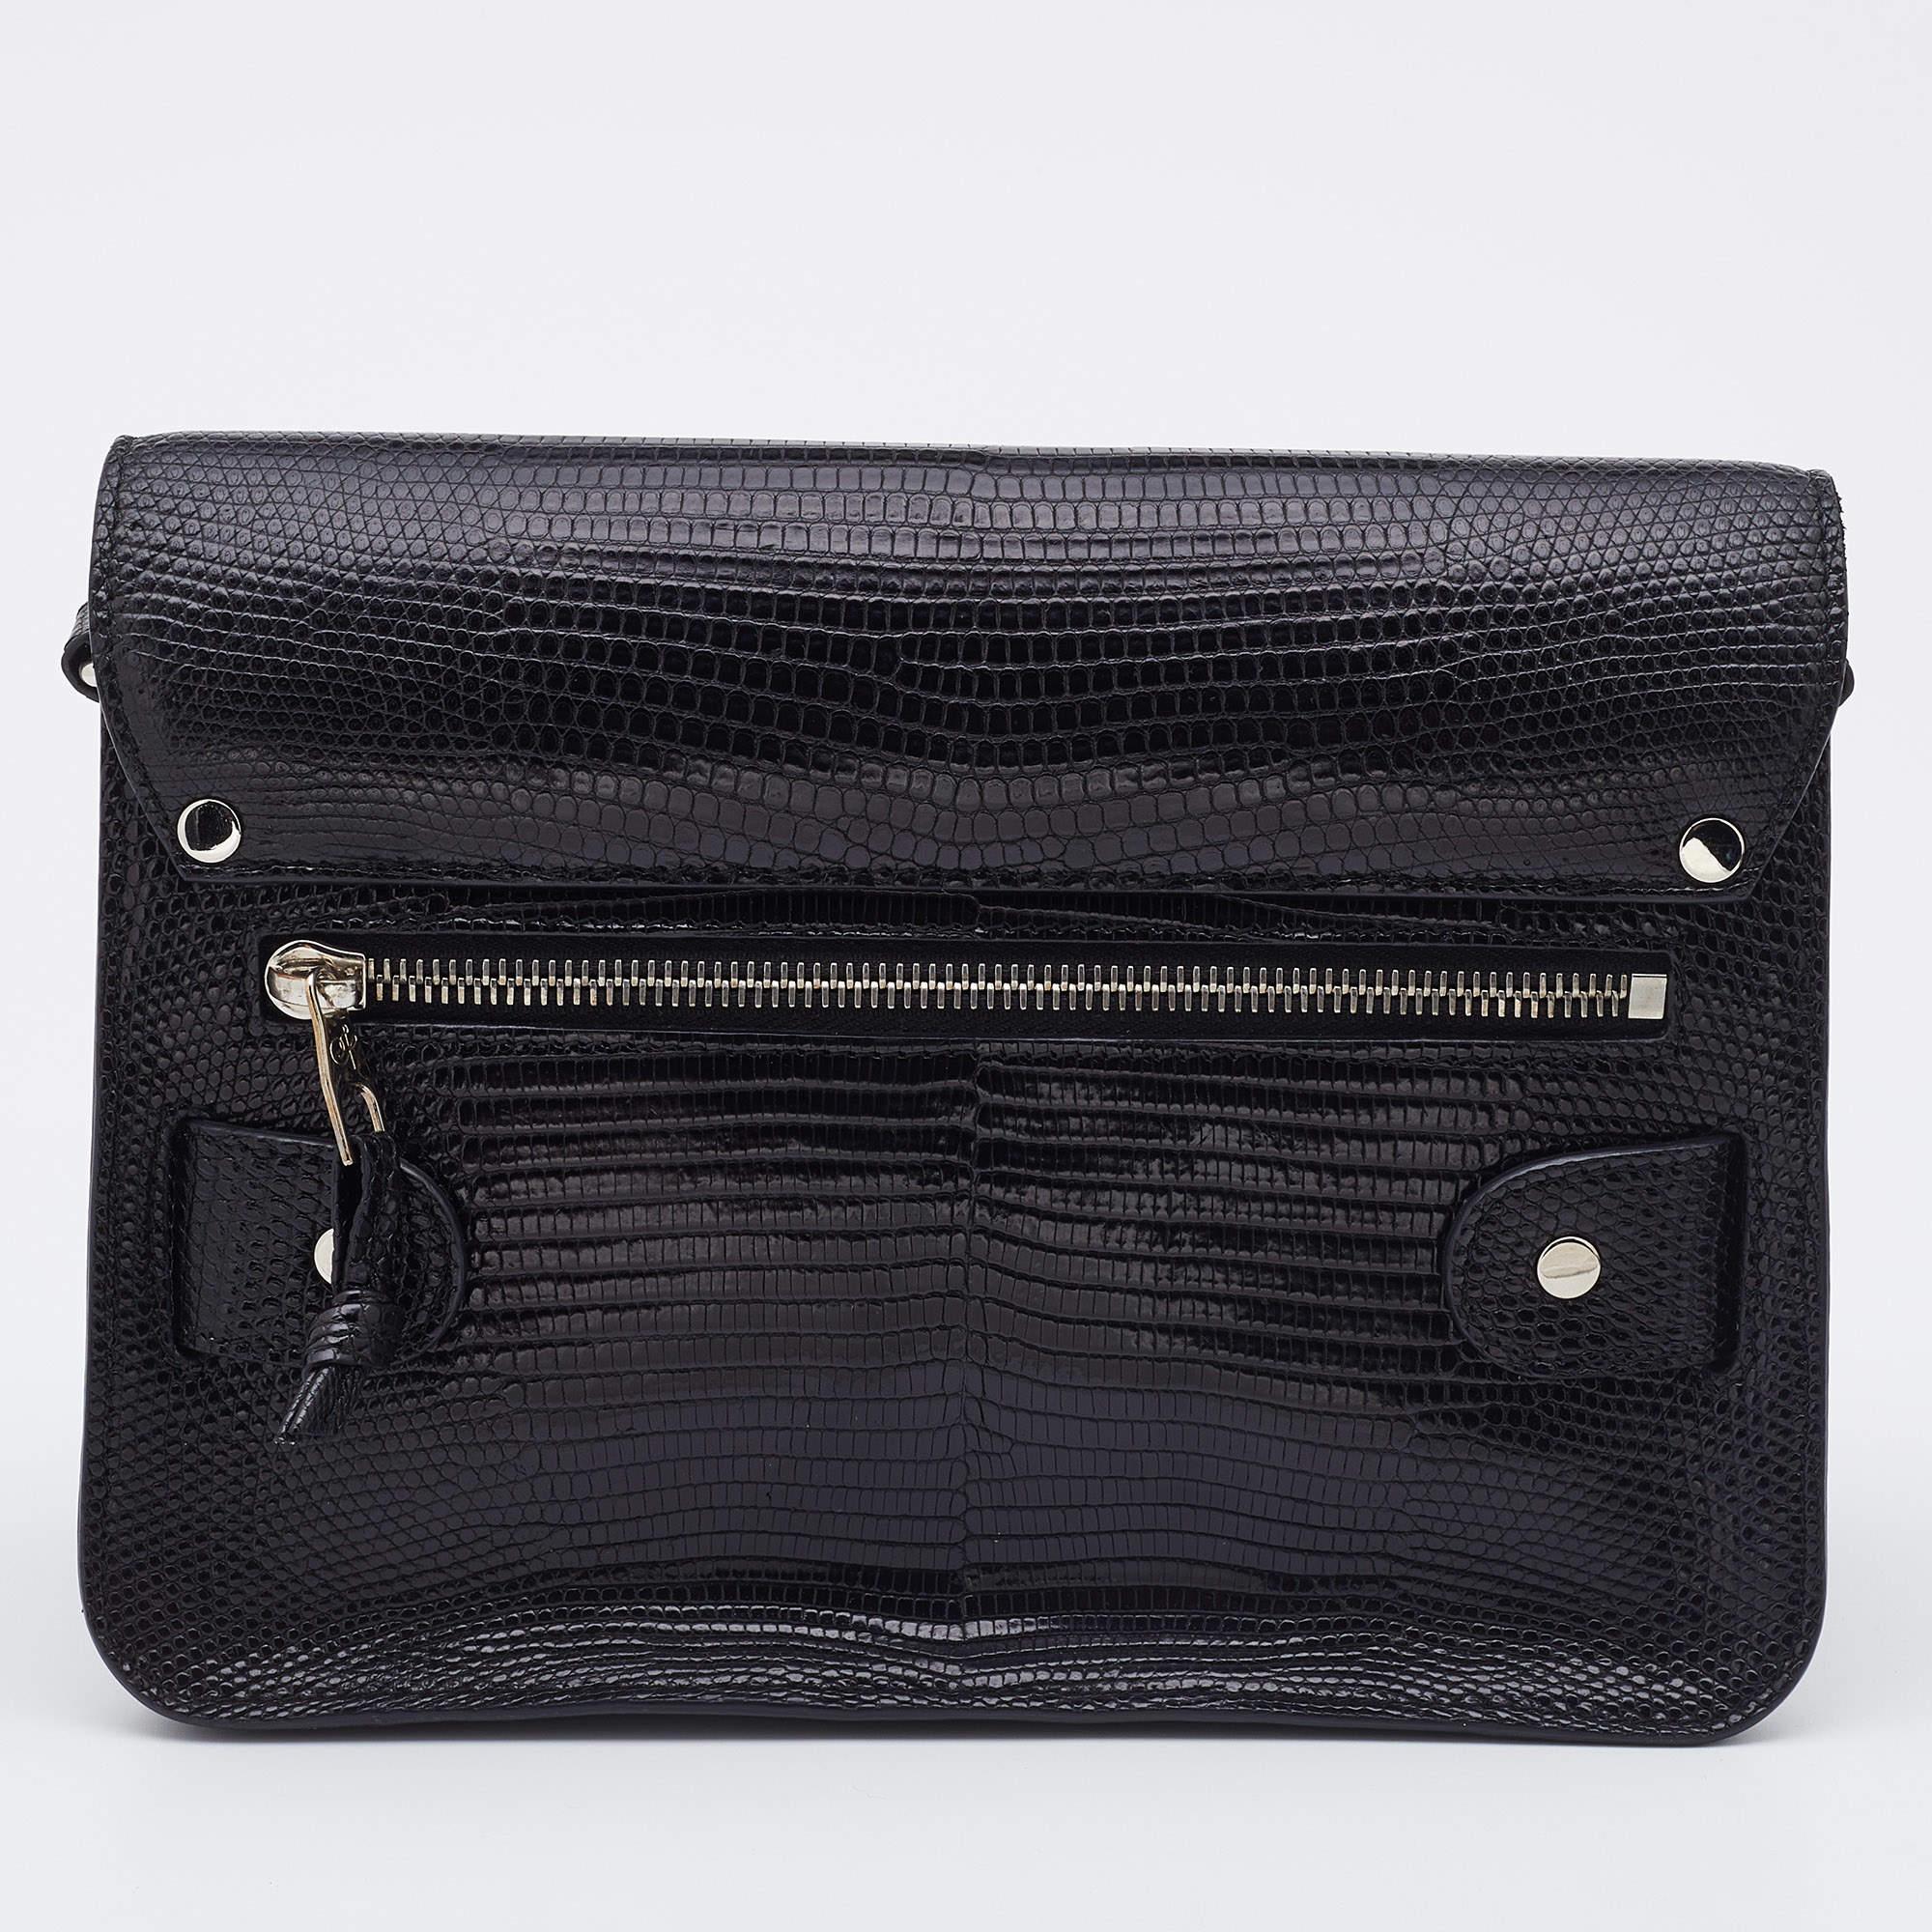 This stylish Classic PS11 shoulder bag from Proenza Schouler is sure to win your love! Crafted from leather, the bag comes with a single shoulder strap. The interior is fabric-lined and sized perfectly to hold your daily essentials. The bag comes